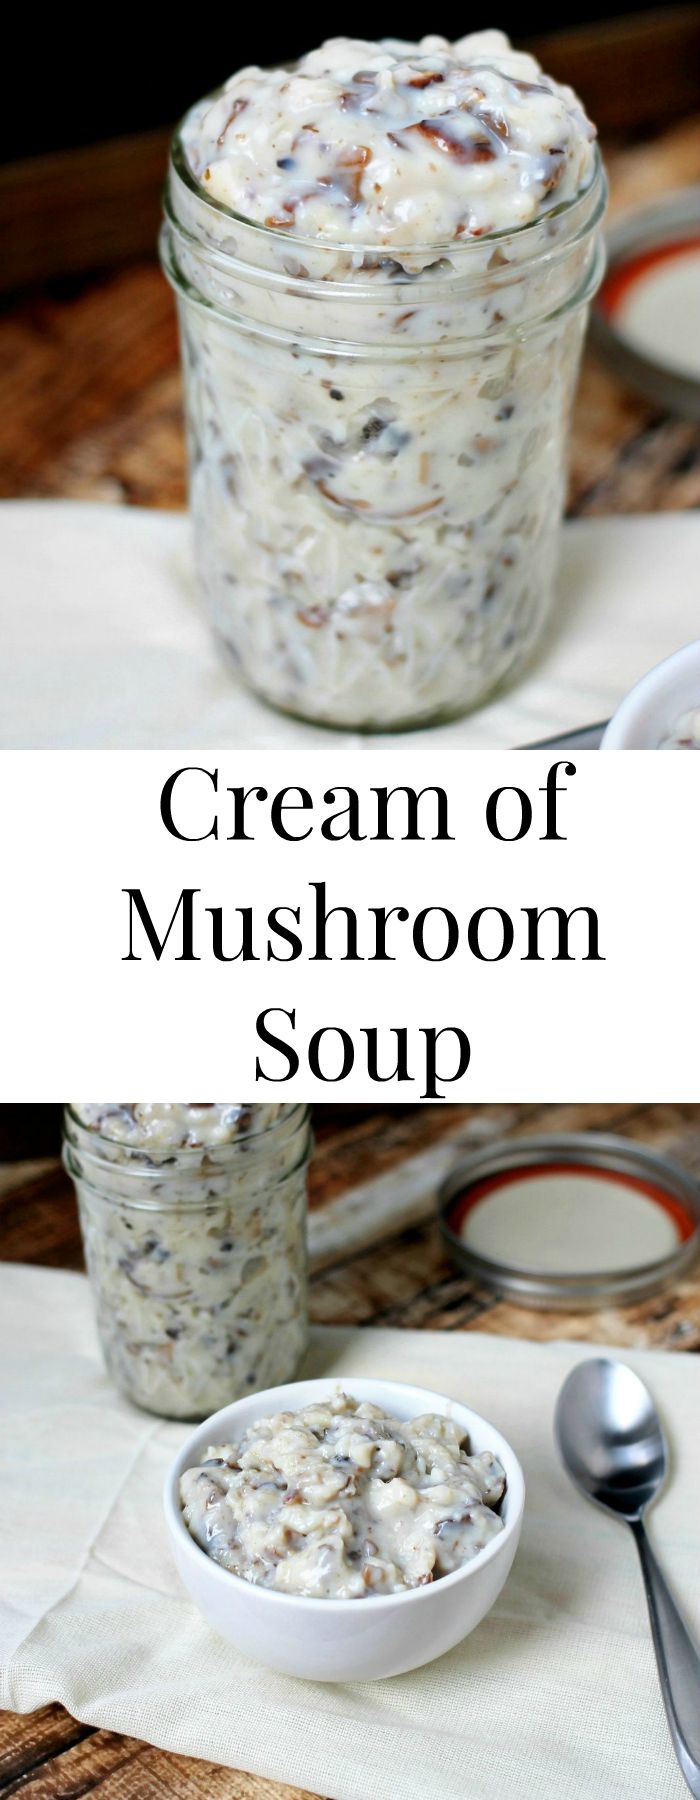 Homemade condensed cream of mushroom soup is so easy to make and a perfect replacement for the canned stuff!